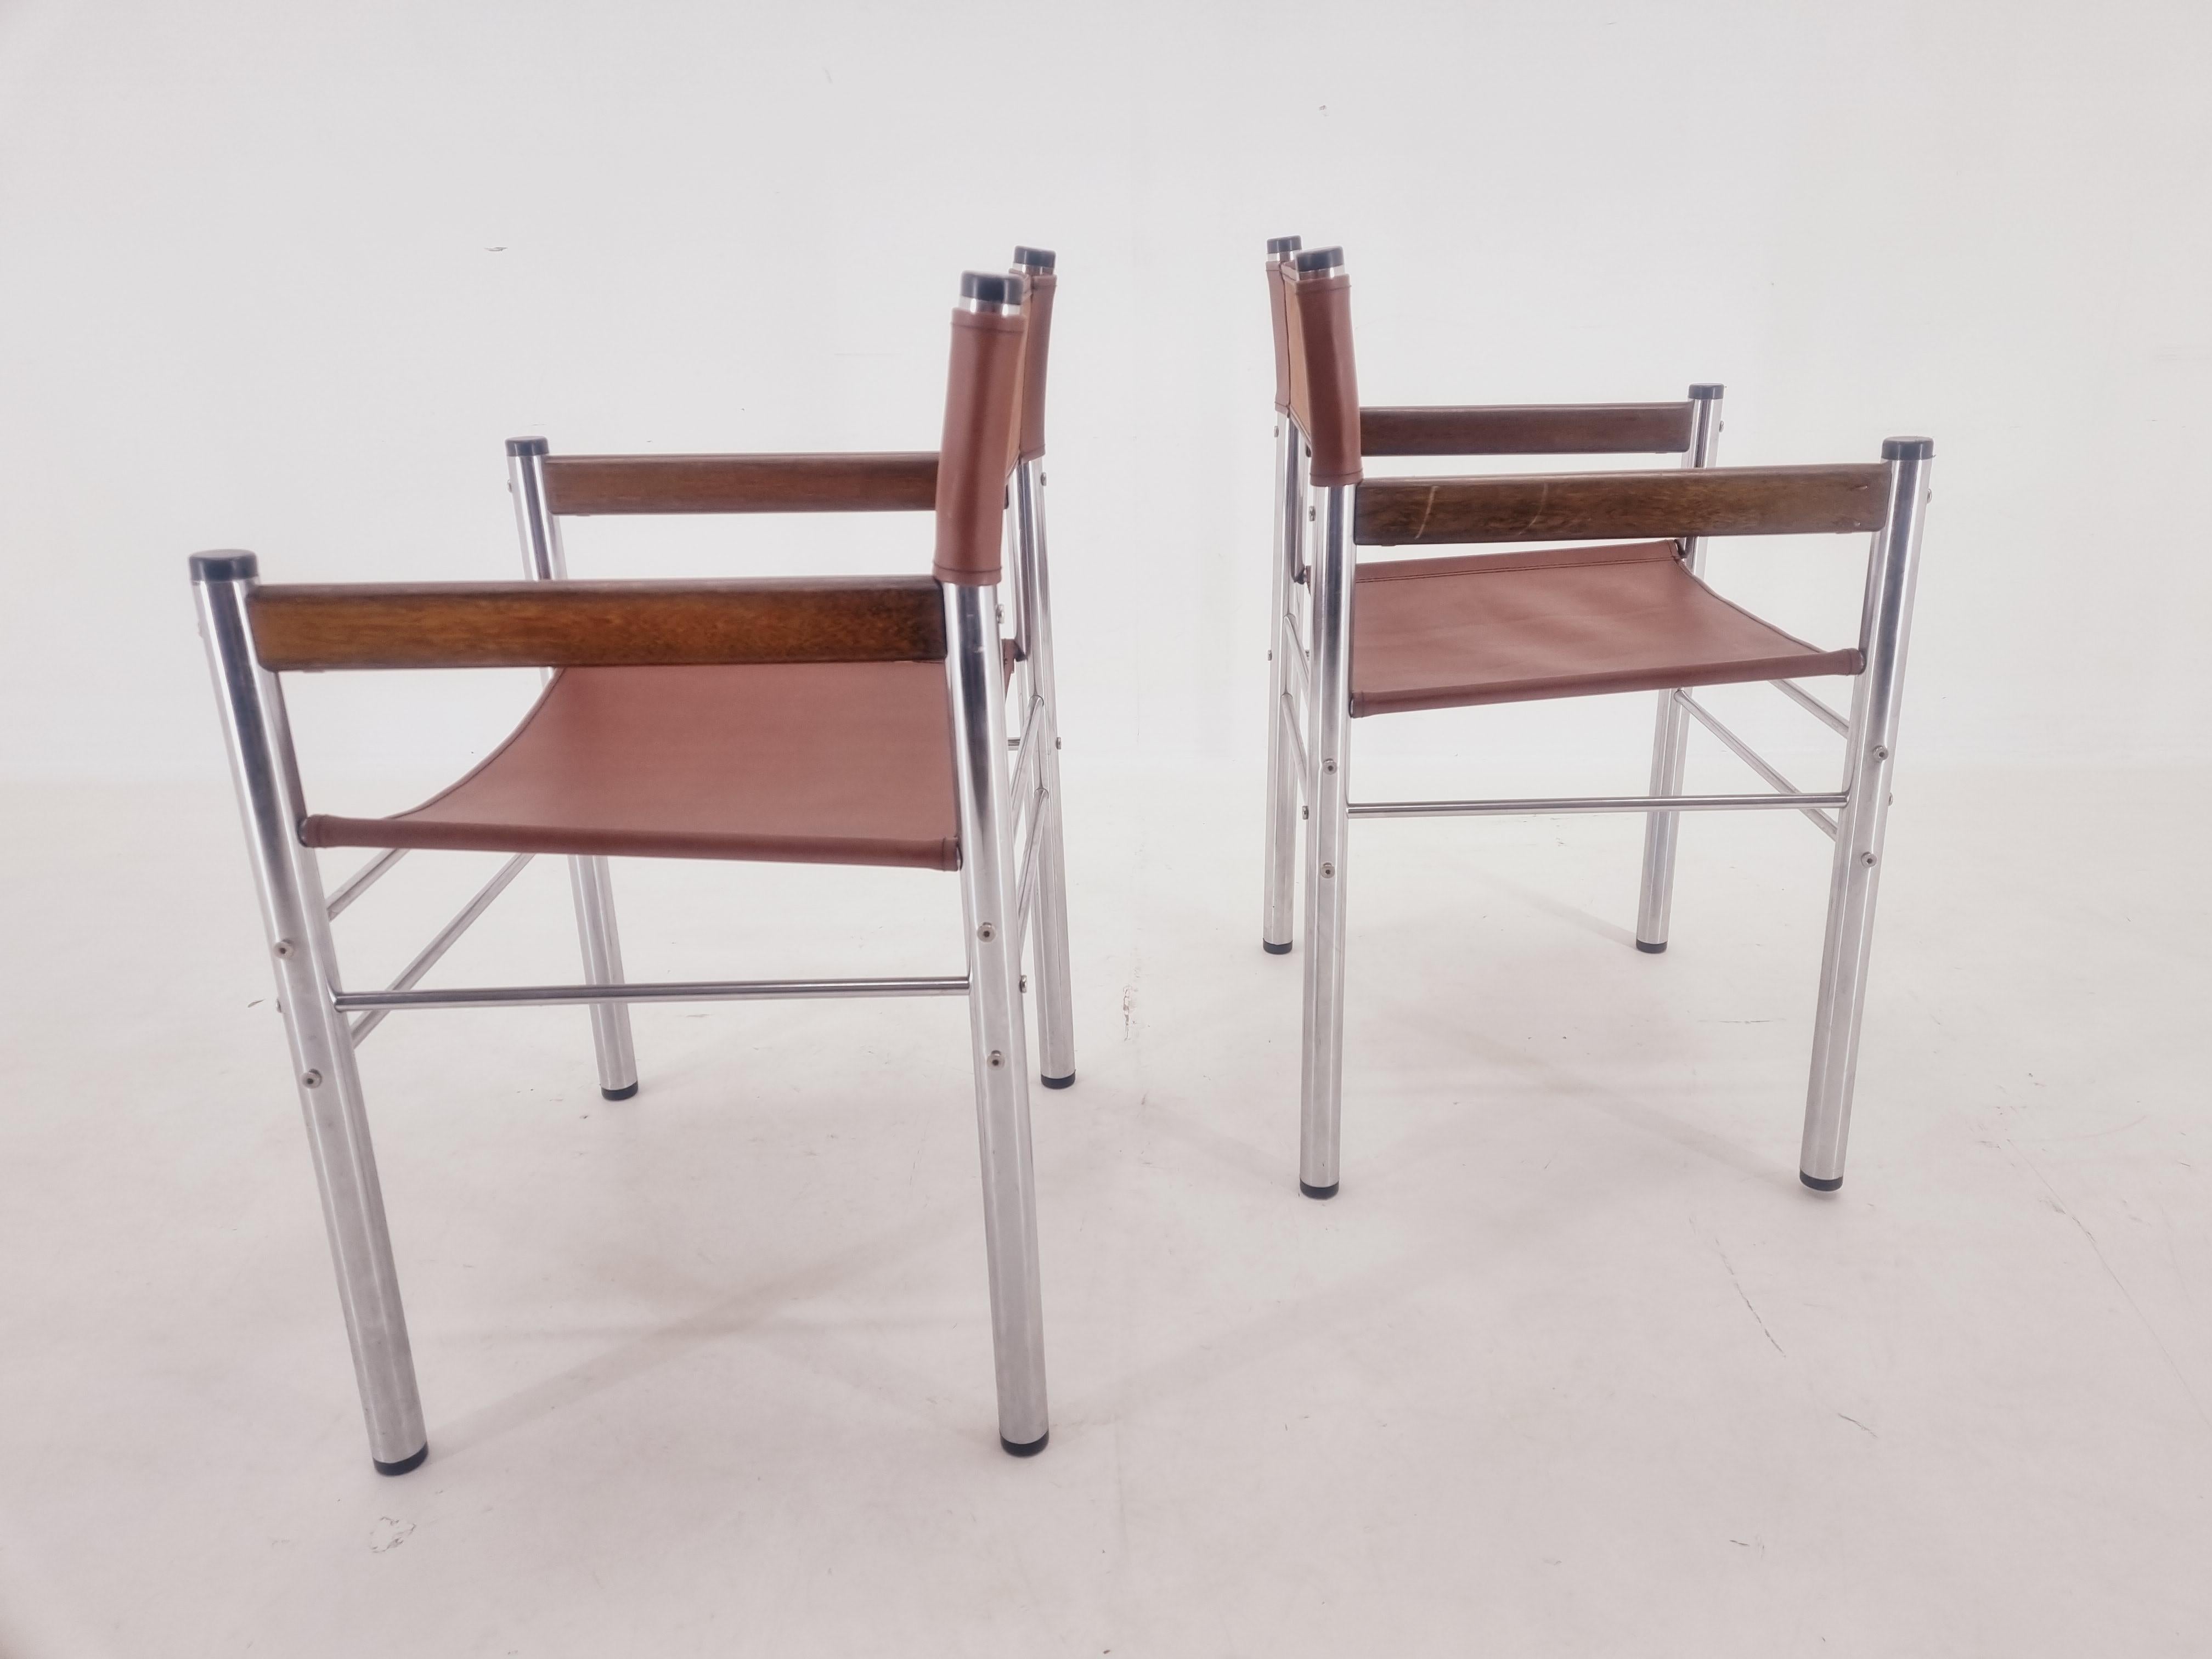 Pair of Rare Midcentury Tubular Design Armchairs, Germany, 1970s For Sale 7